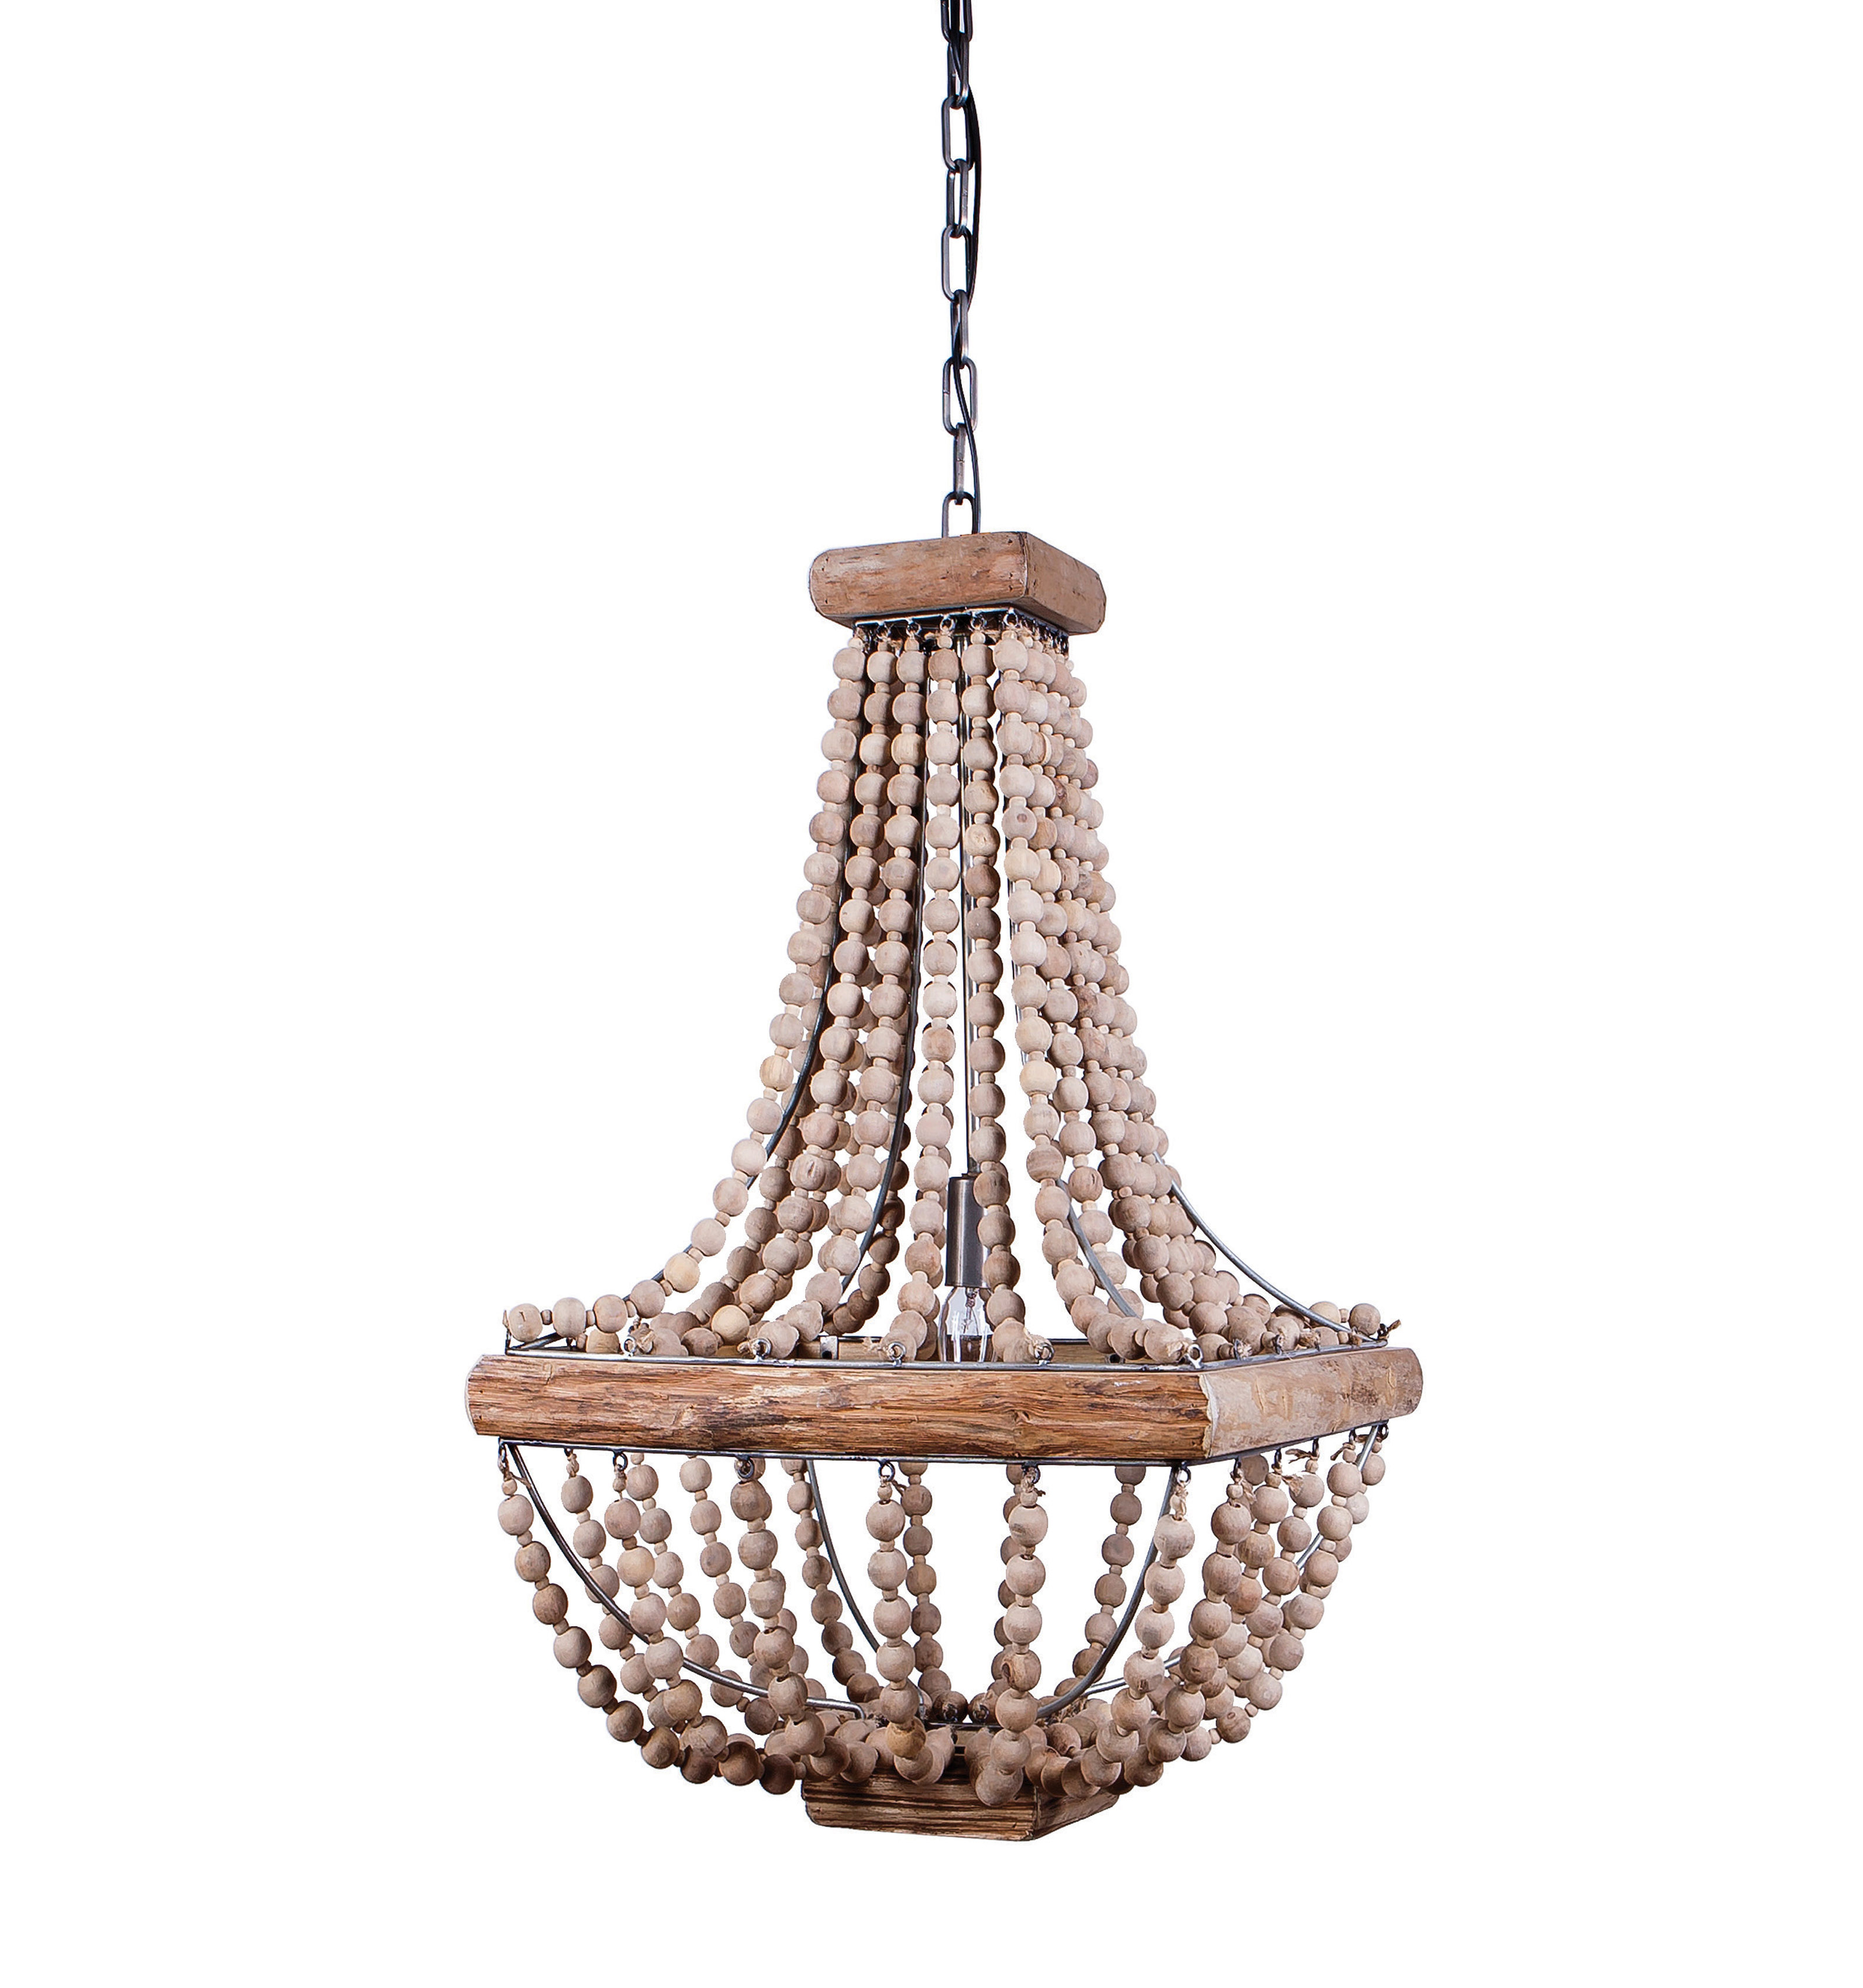 Wood & Metal Framed Chandelier with Wood Bead Draping - Nomad Home